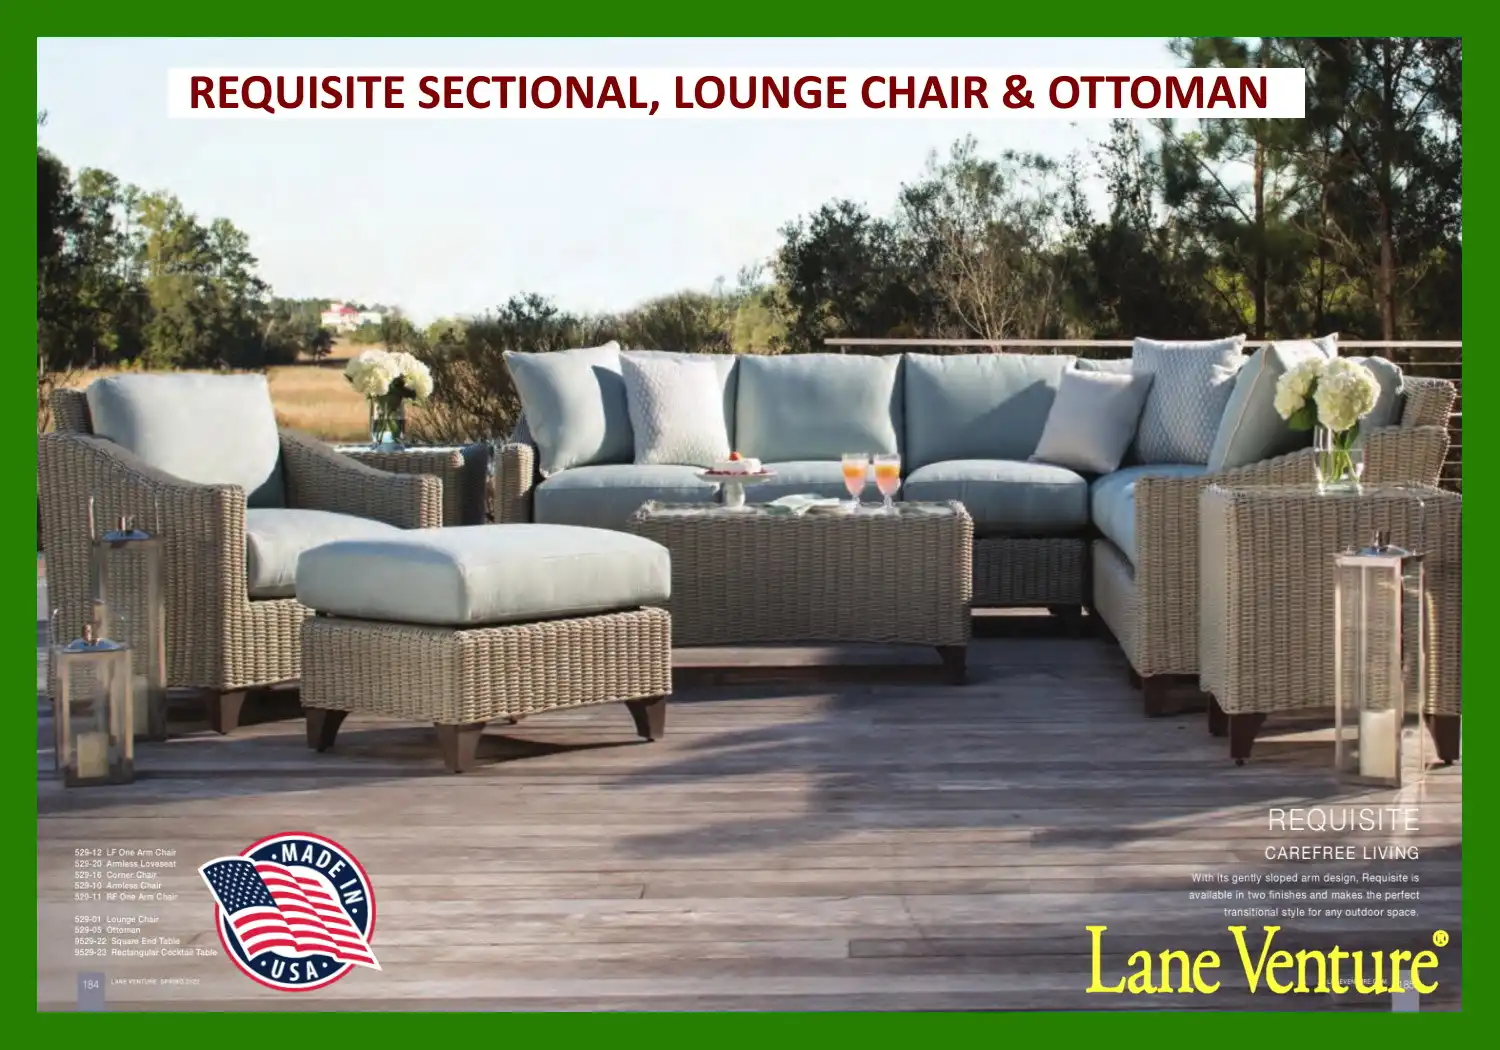 REQUISITE SECTIONAL, LOUNGE CHAIR & OTTOMAN